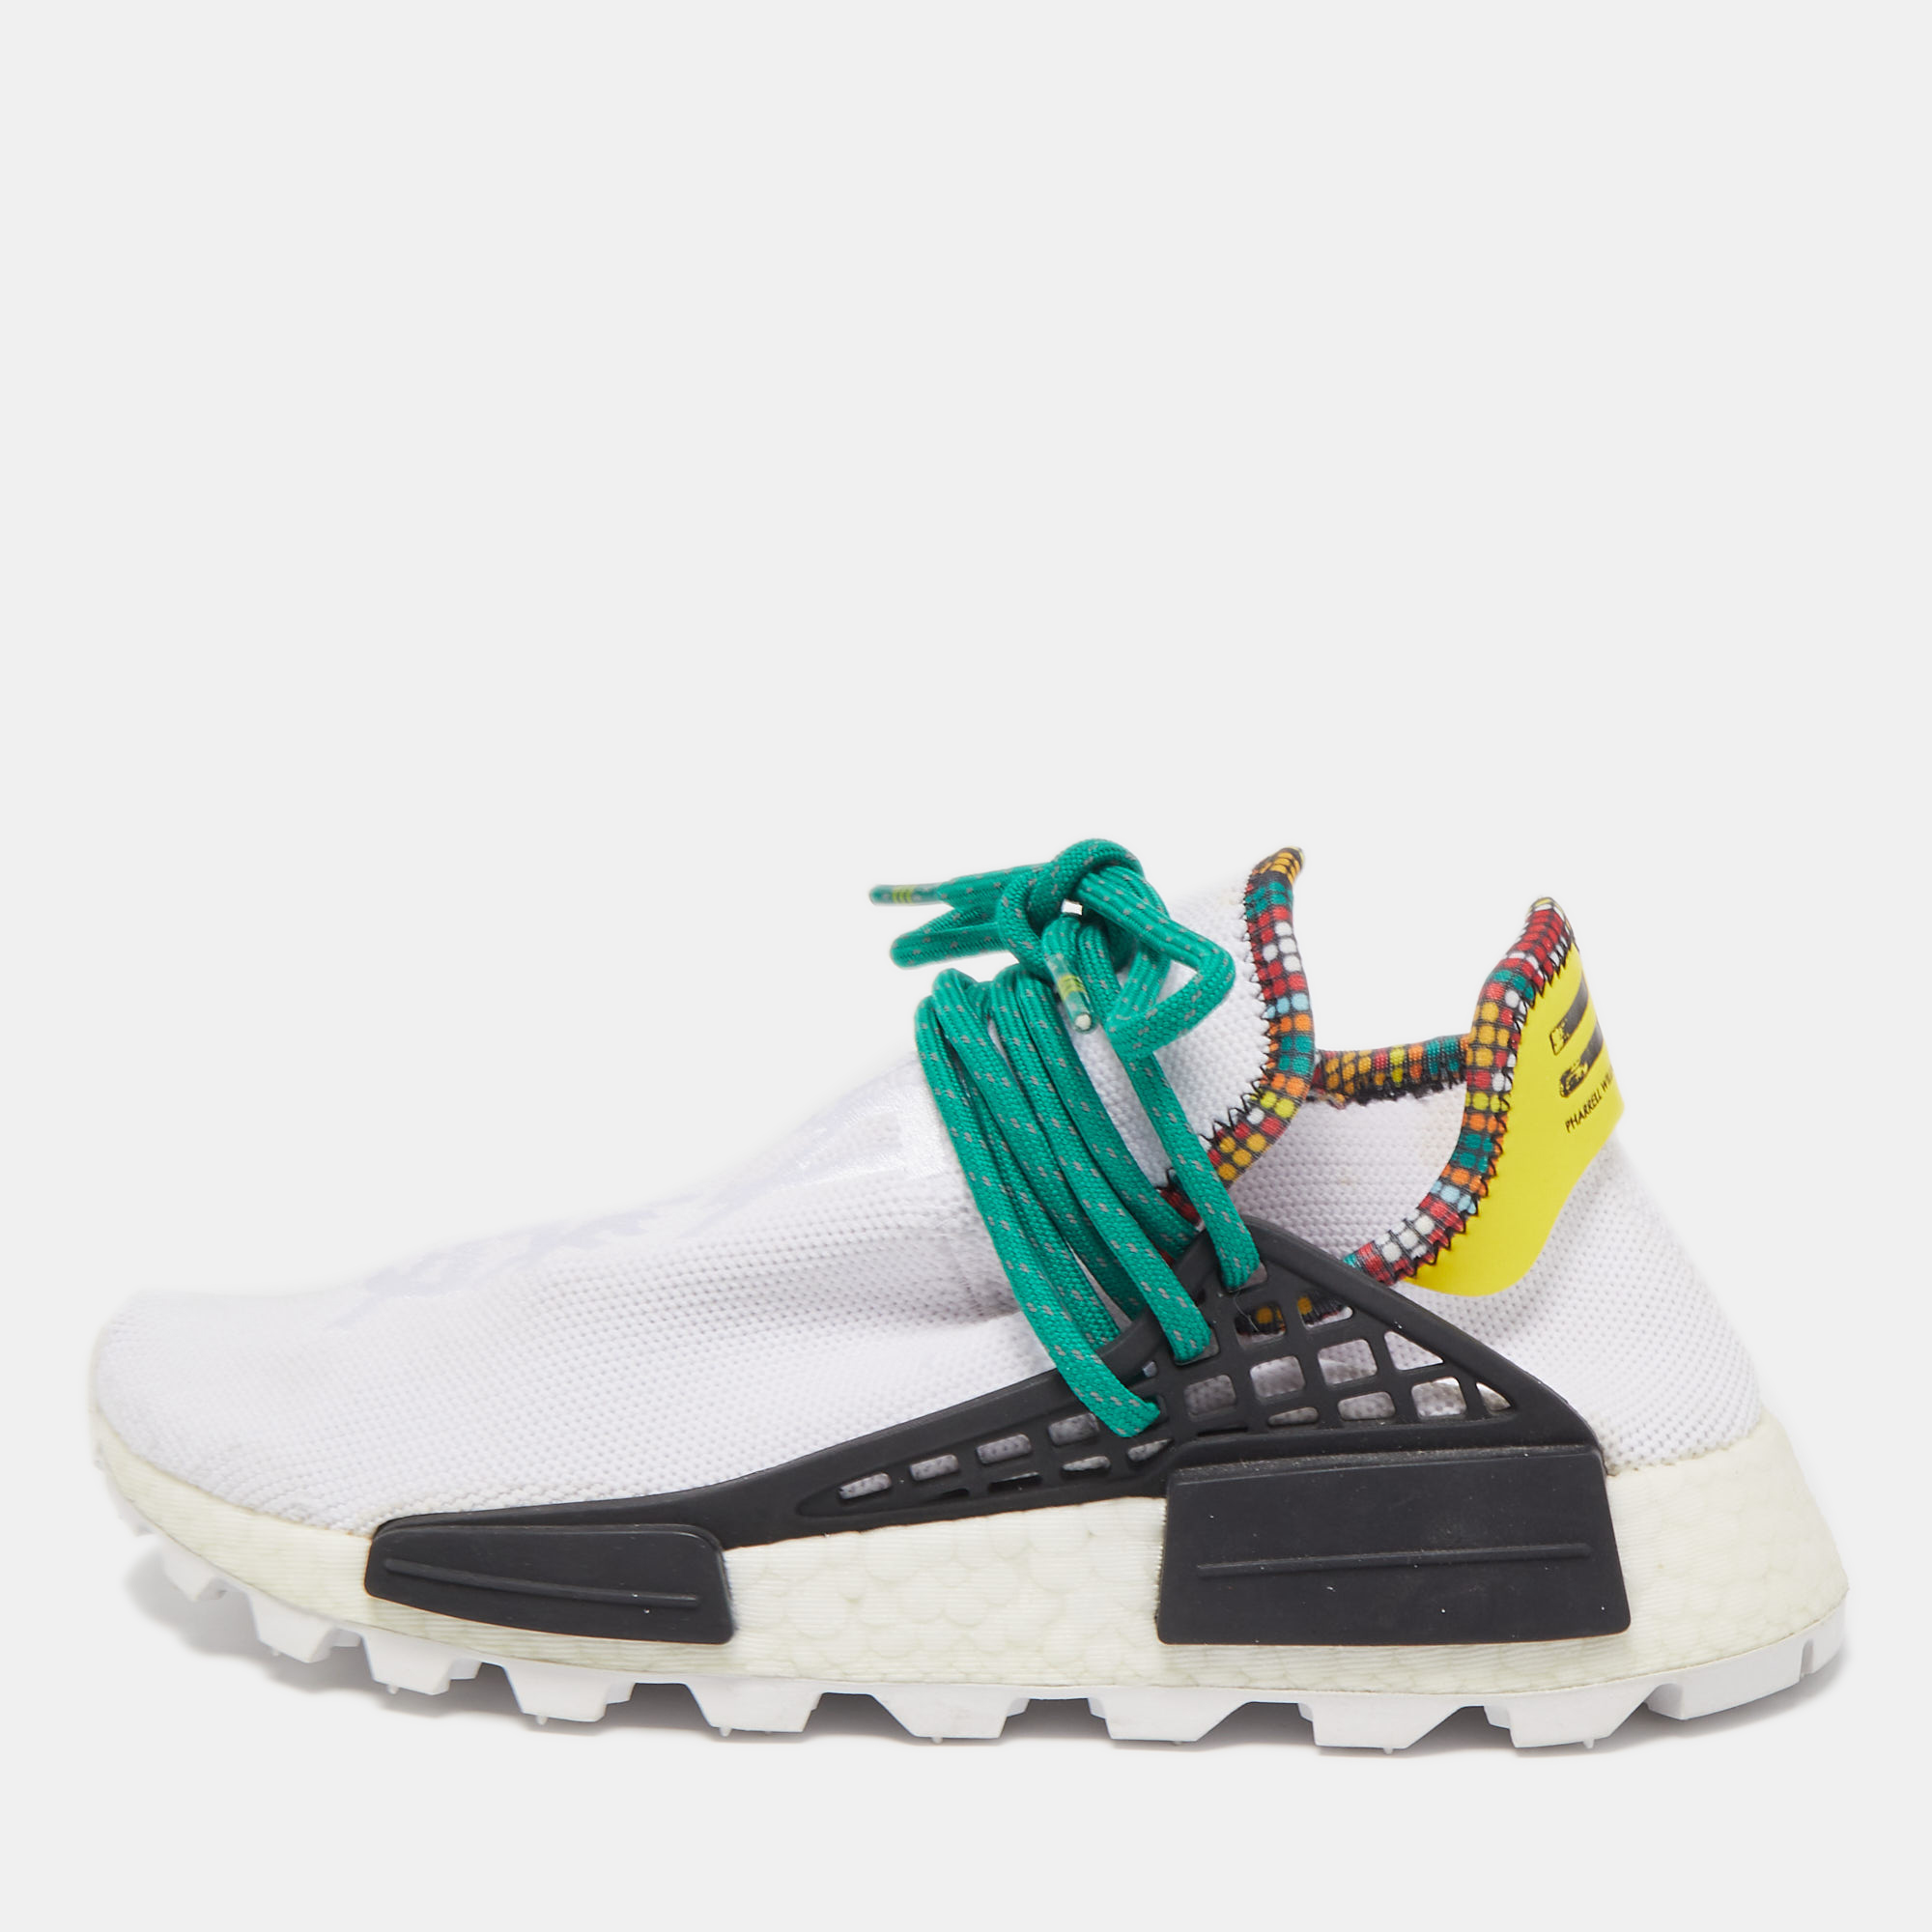 Pre-owned Adidas Originals Pharrell Williams X Adidas White Fabric Human Body Nmd Trainers Size 37 1/3